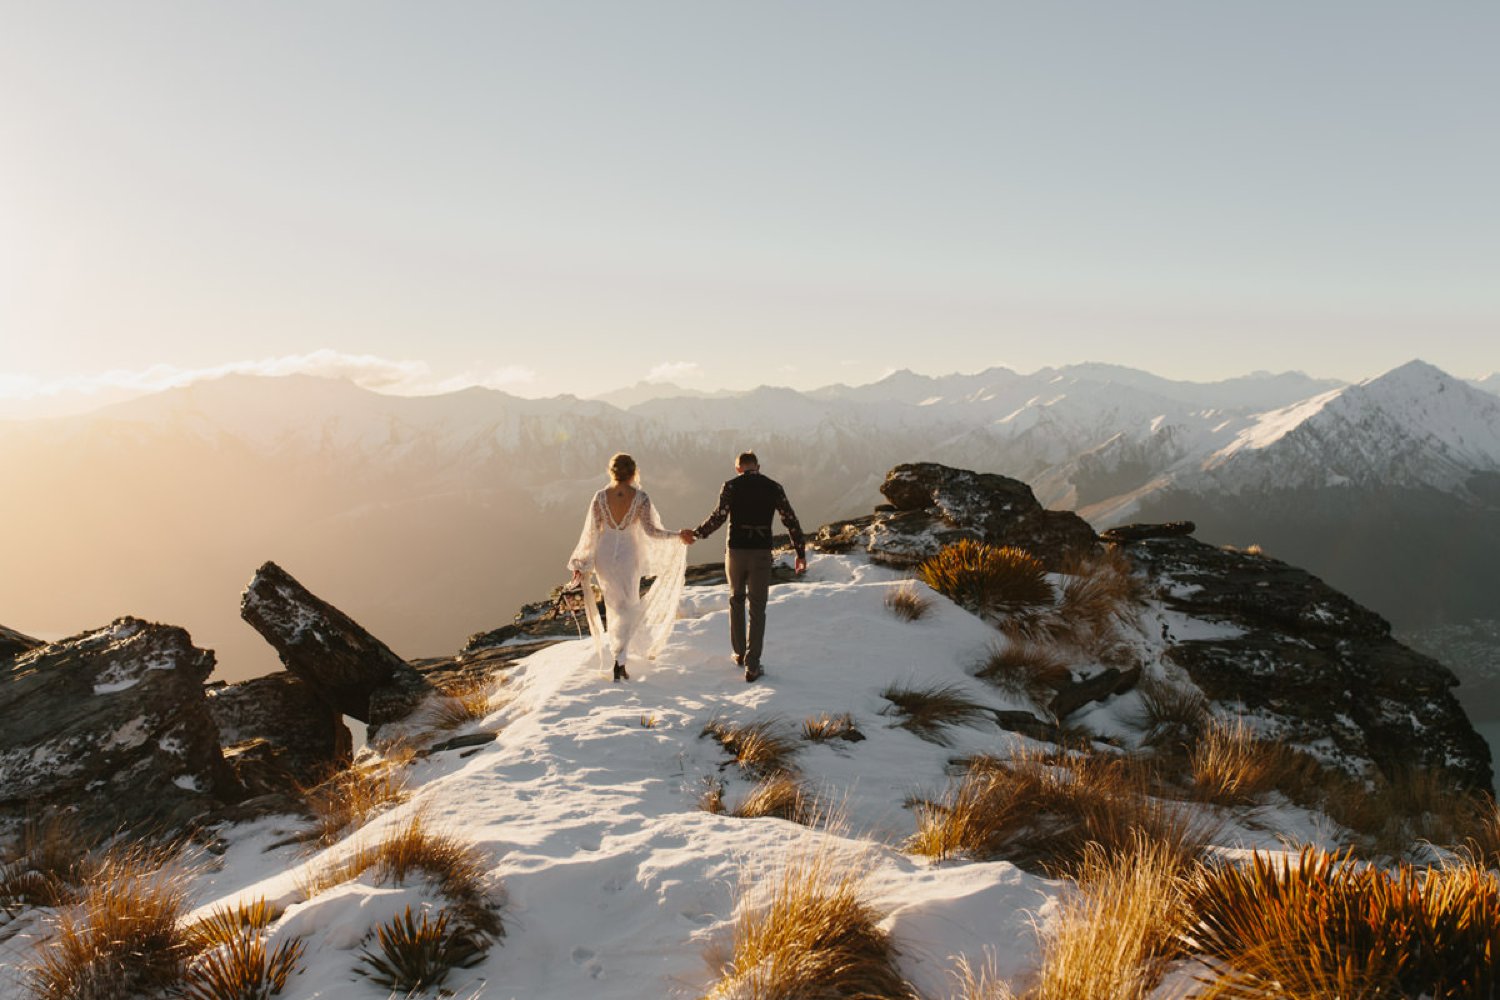 Modern Bride and Groom standing on a snow capped mountain at Cecil Peak Winter Helicopter Elopement by The Lovers Elopement Co